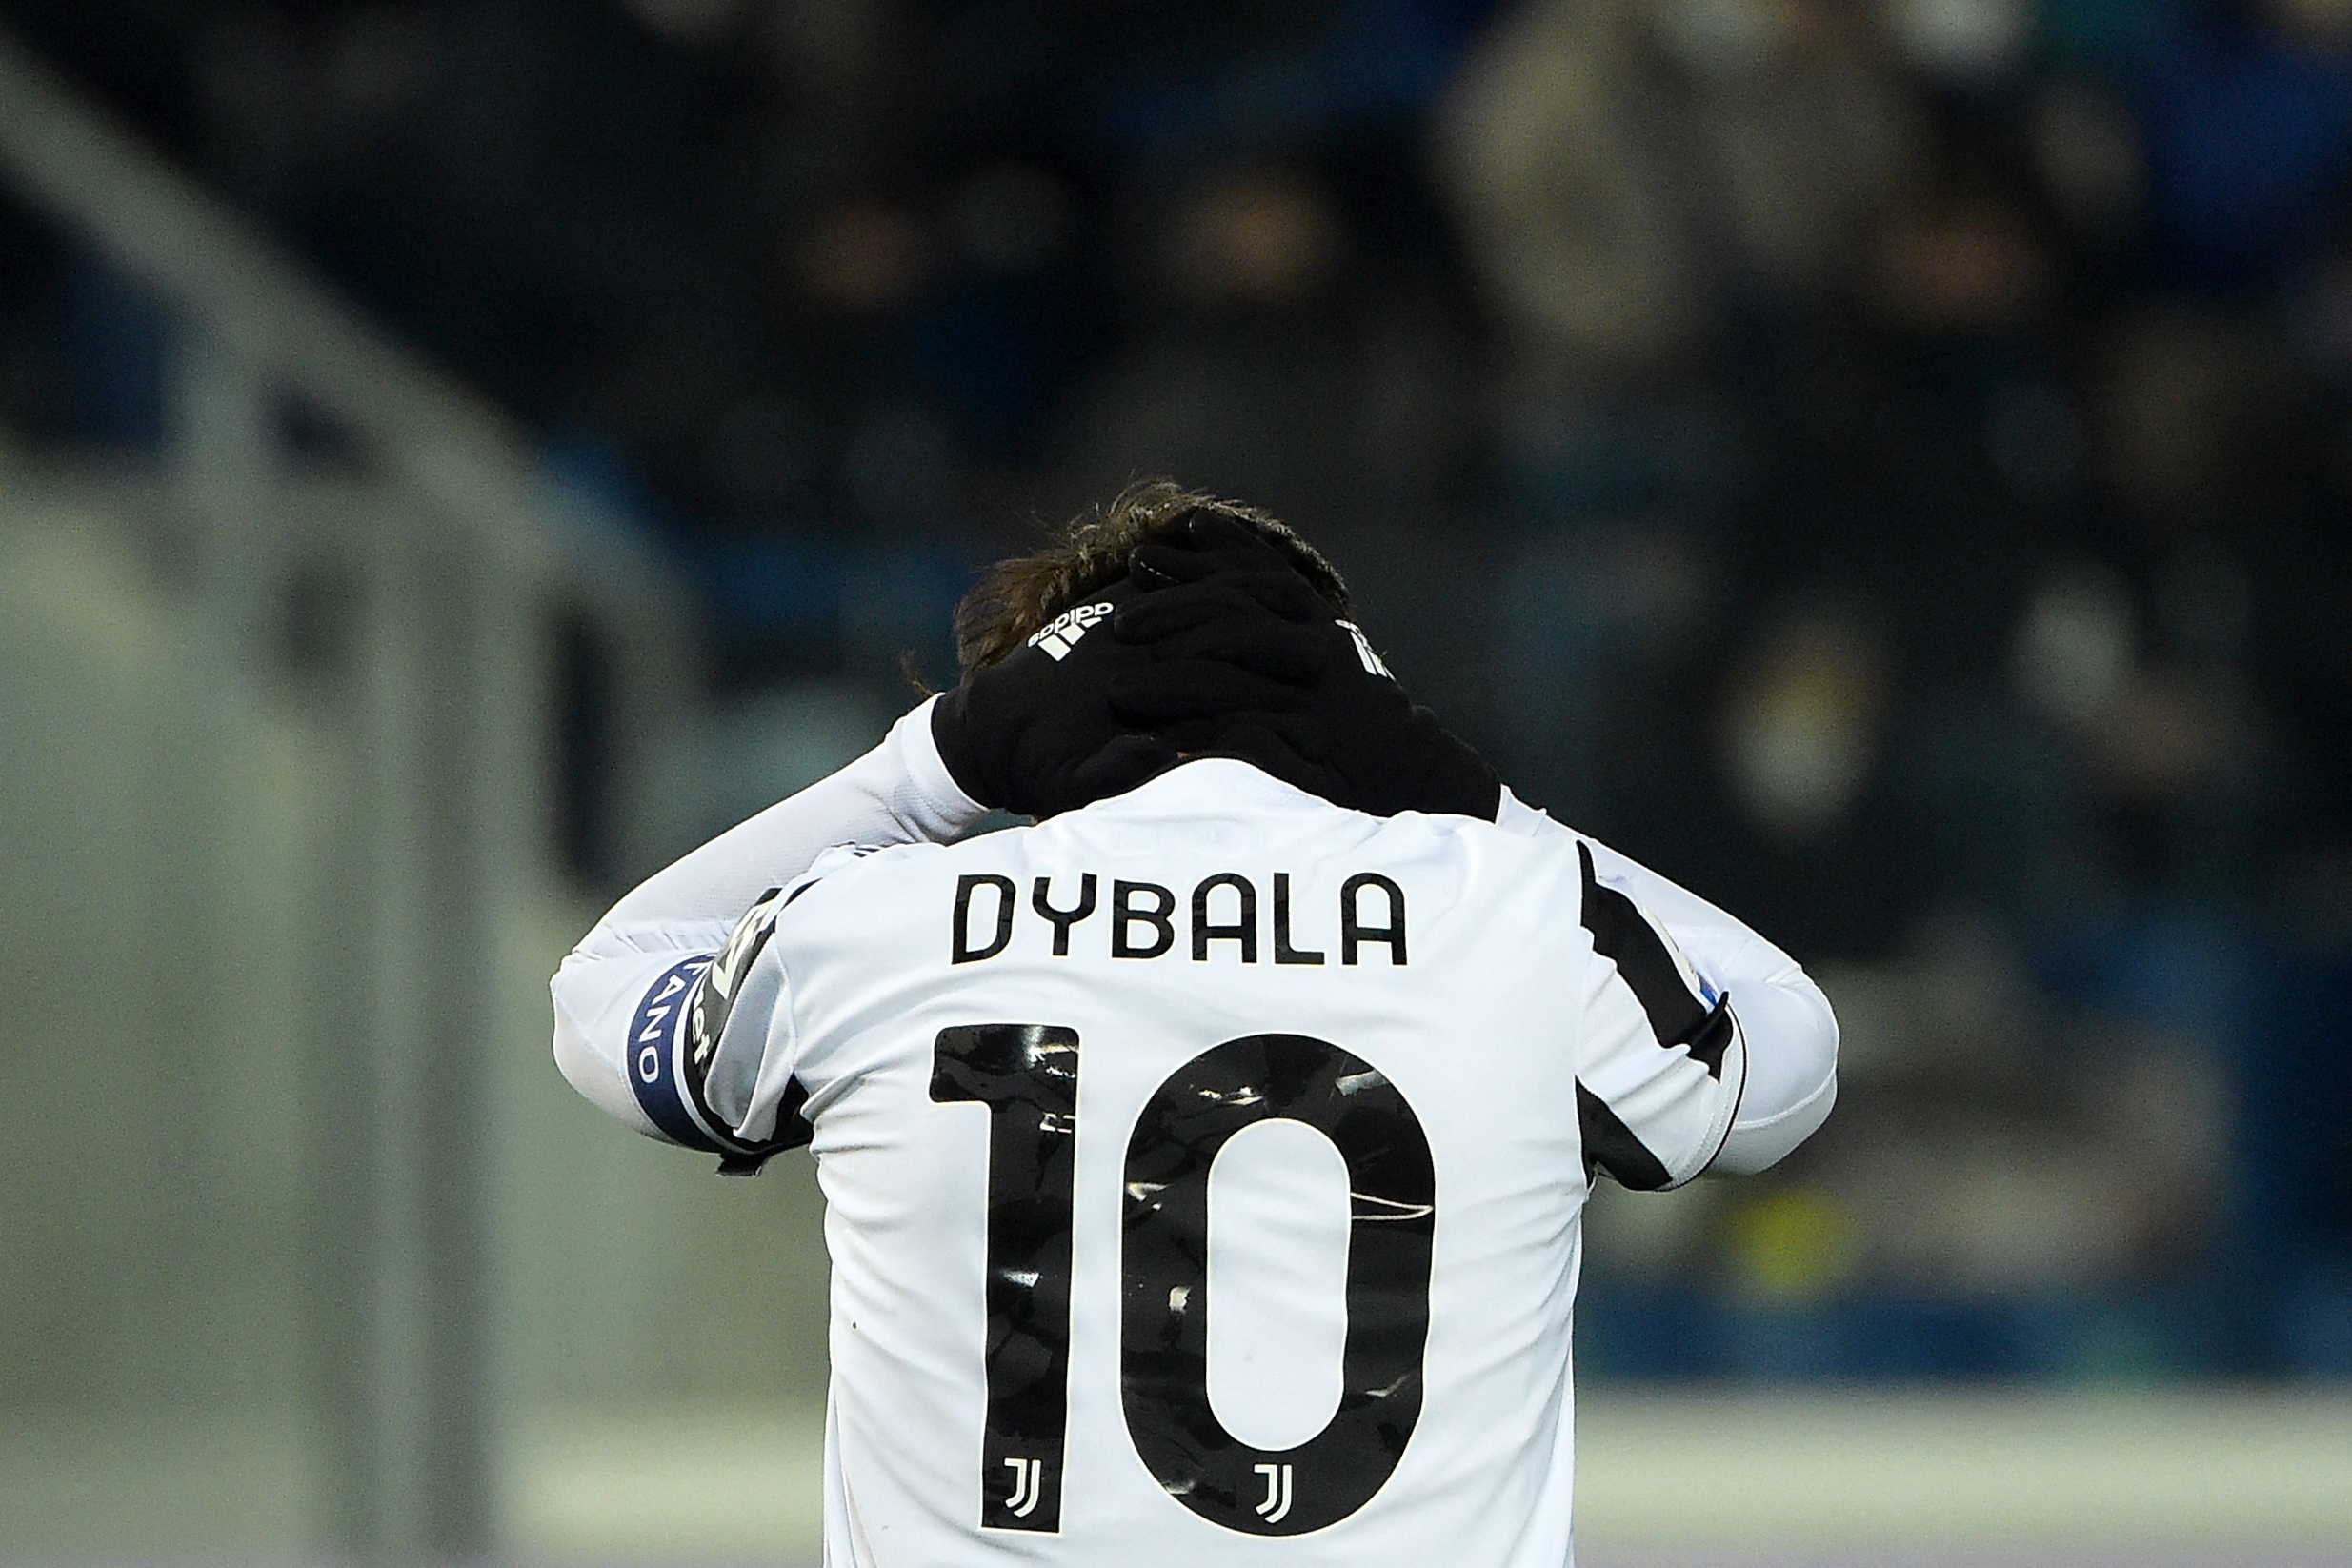 Manchester United and Arsenal have made initial contact with the agent of Paulo Dybala. The Argentine netted 115 goals in 293 appearances for Juventus.